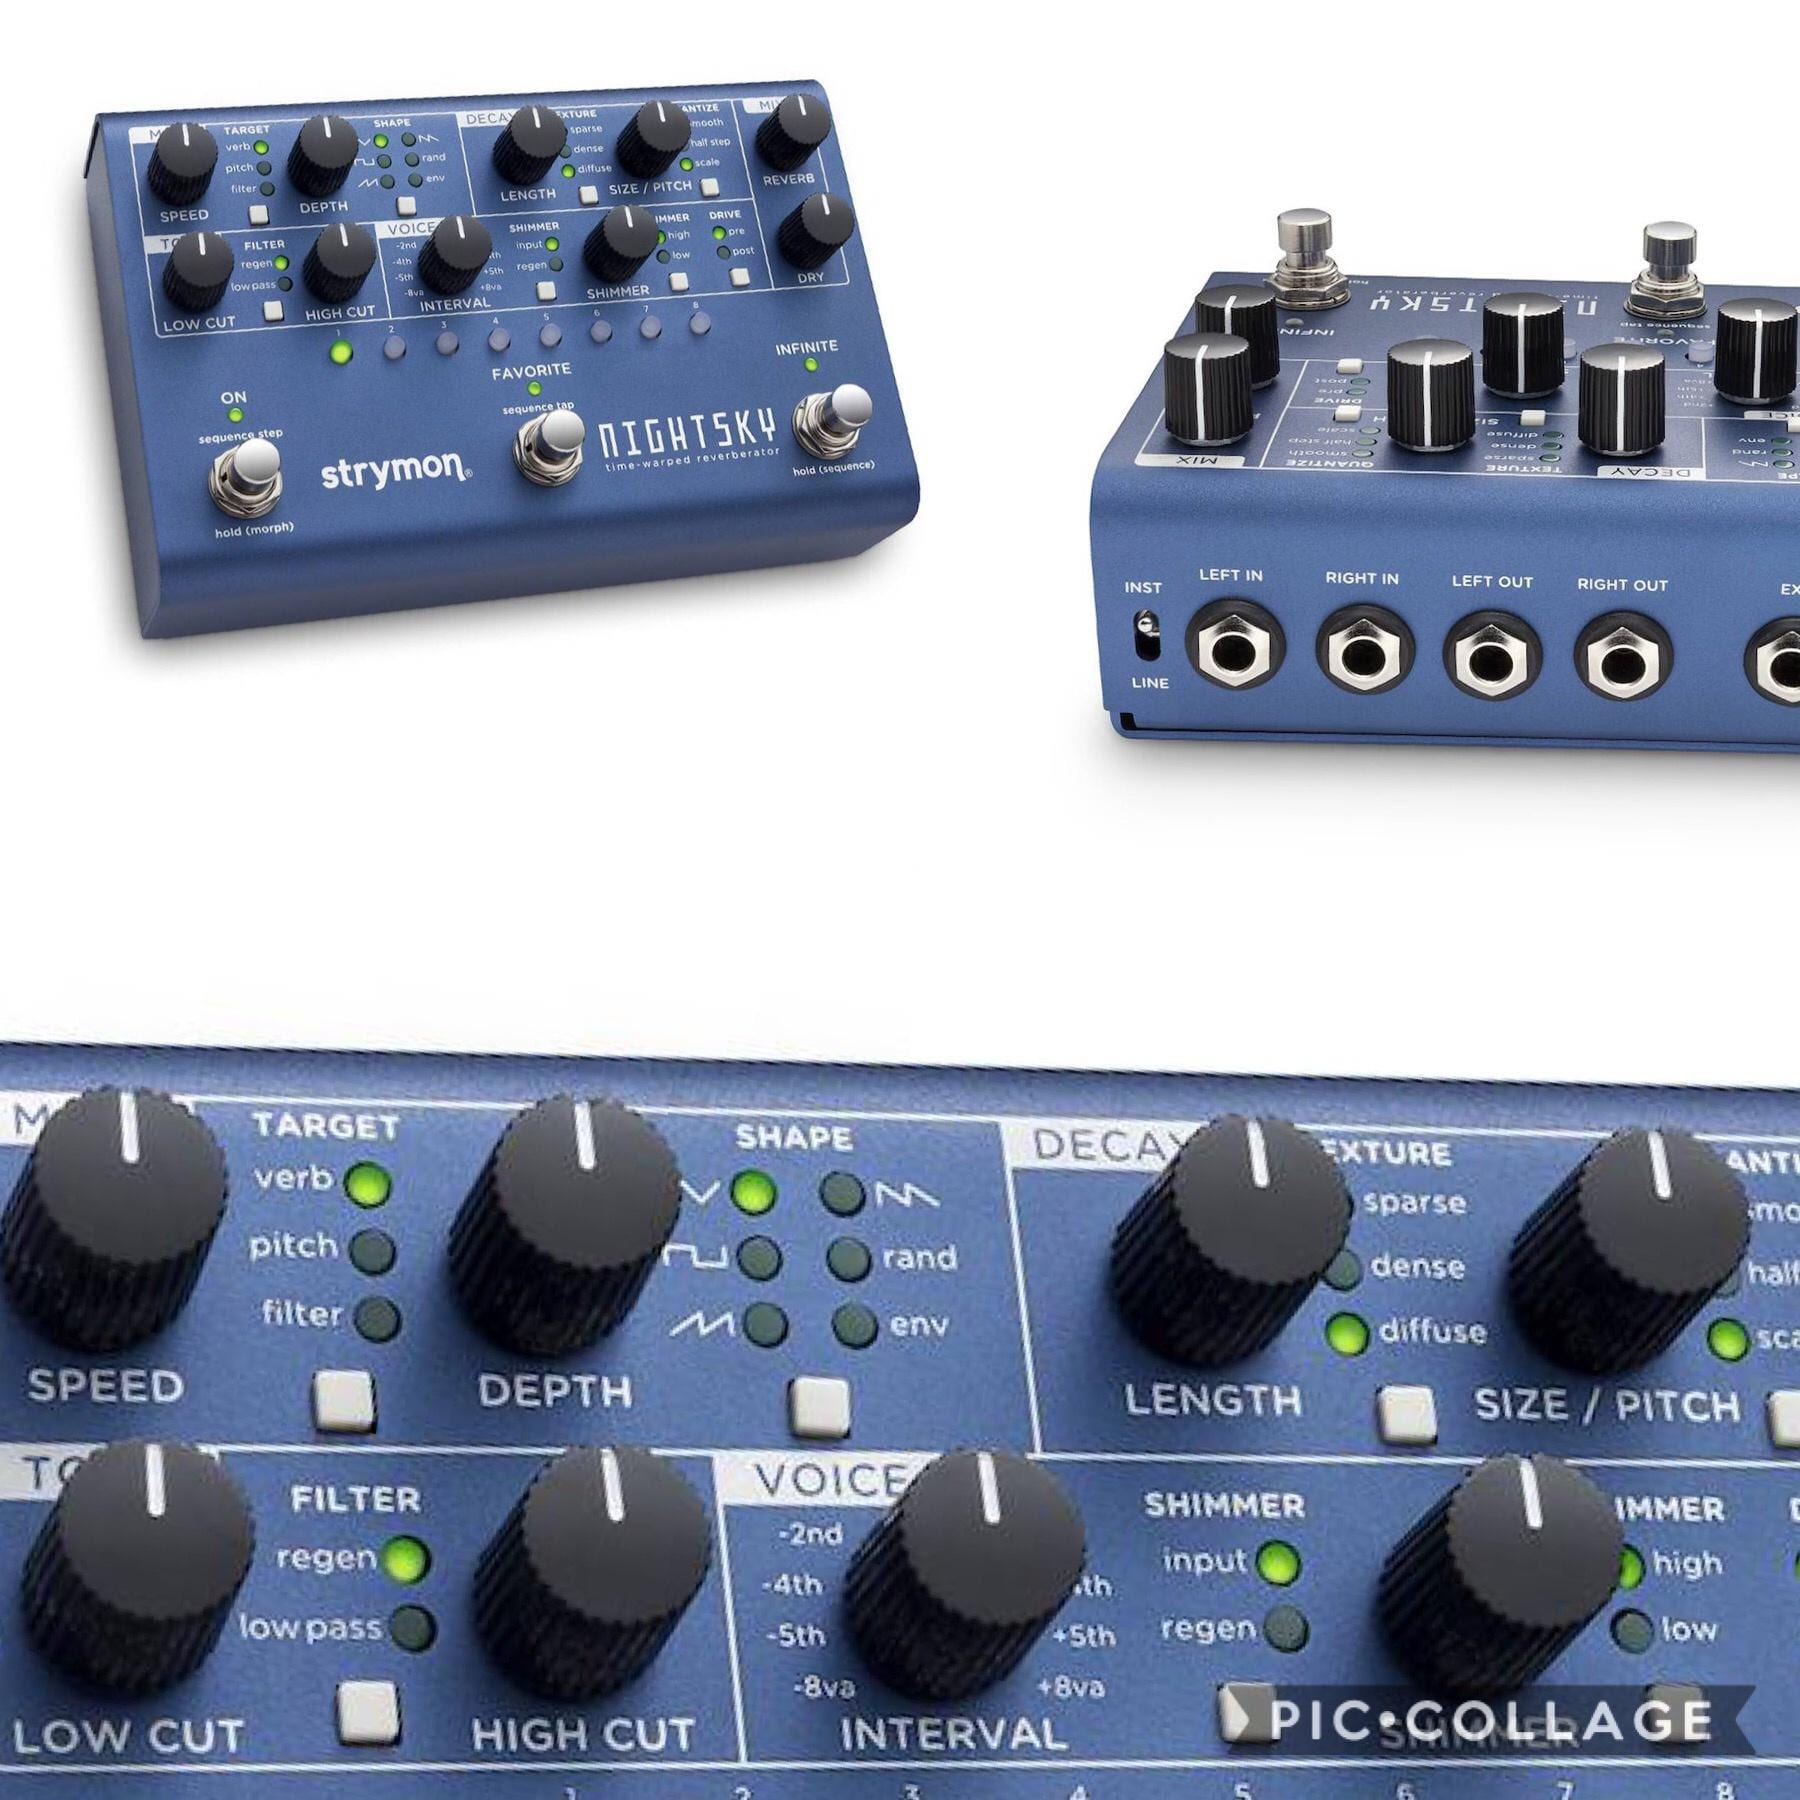 Strymon NightSky leaked online ahead of official launch